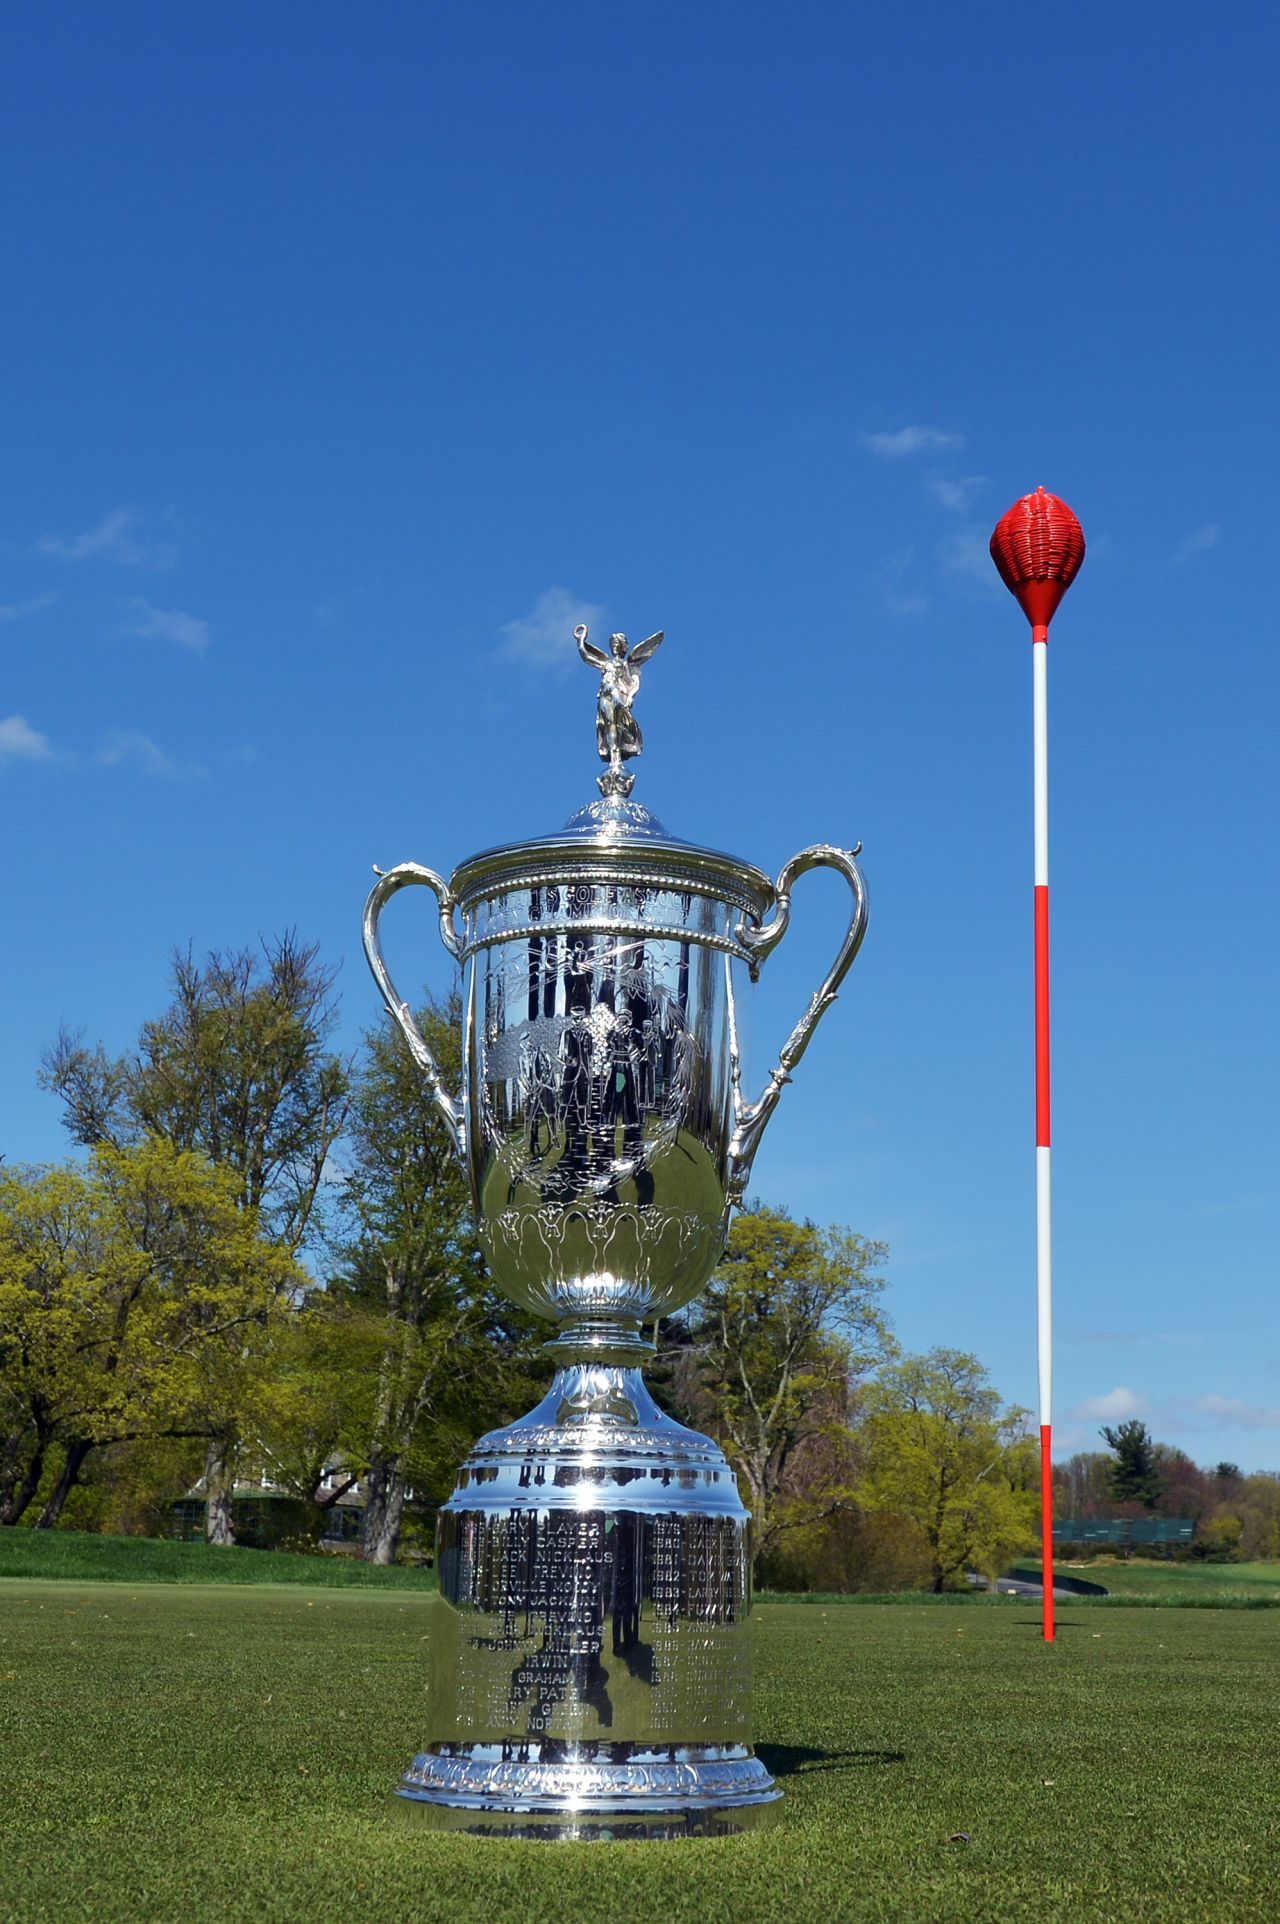 The famous wicker basket flagsticks will be on full view again at the 2013 U.S. Open on the East Course at Merion.